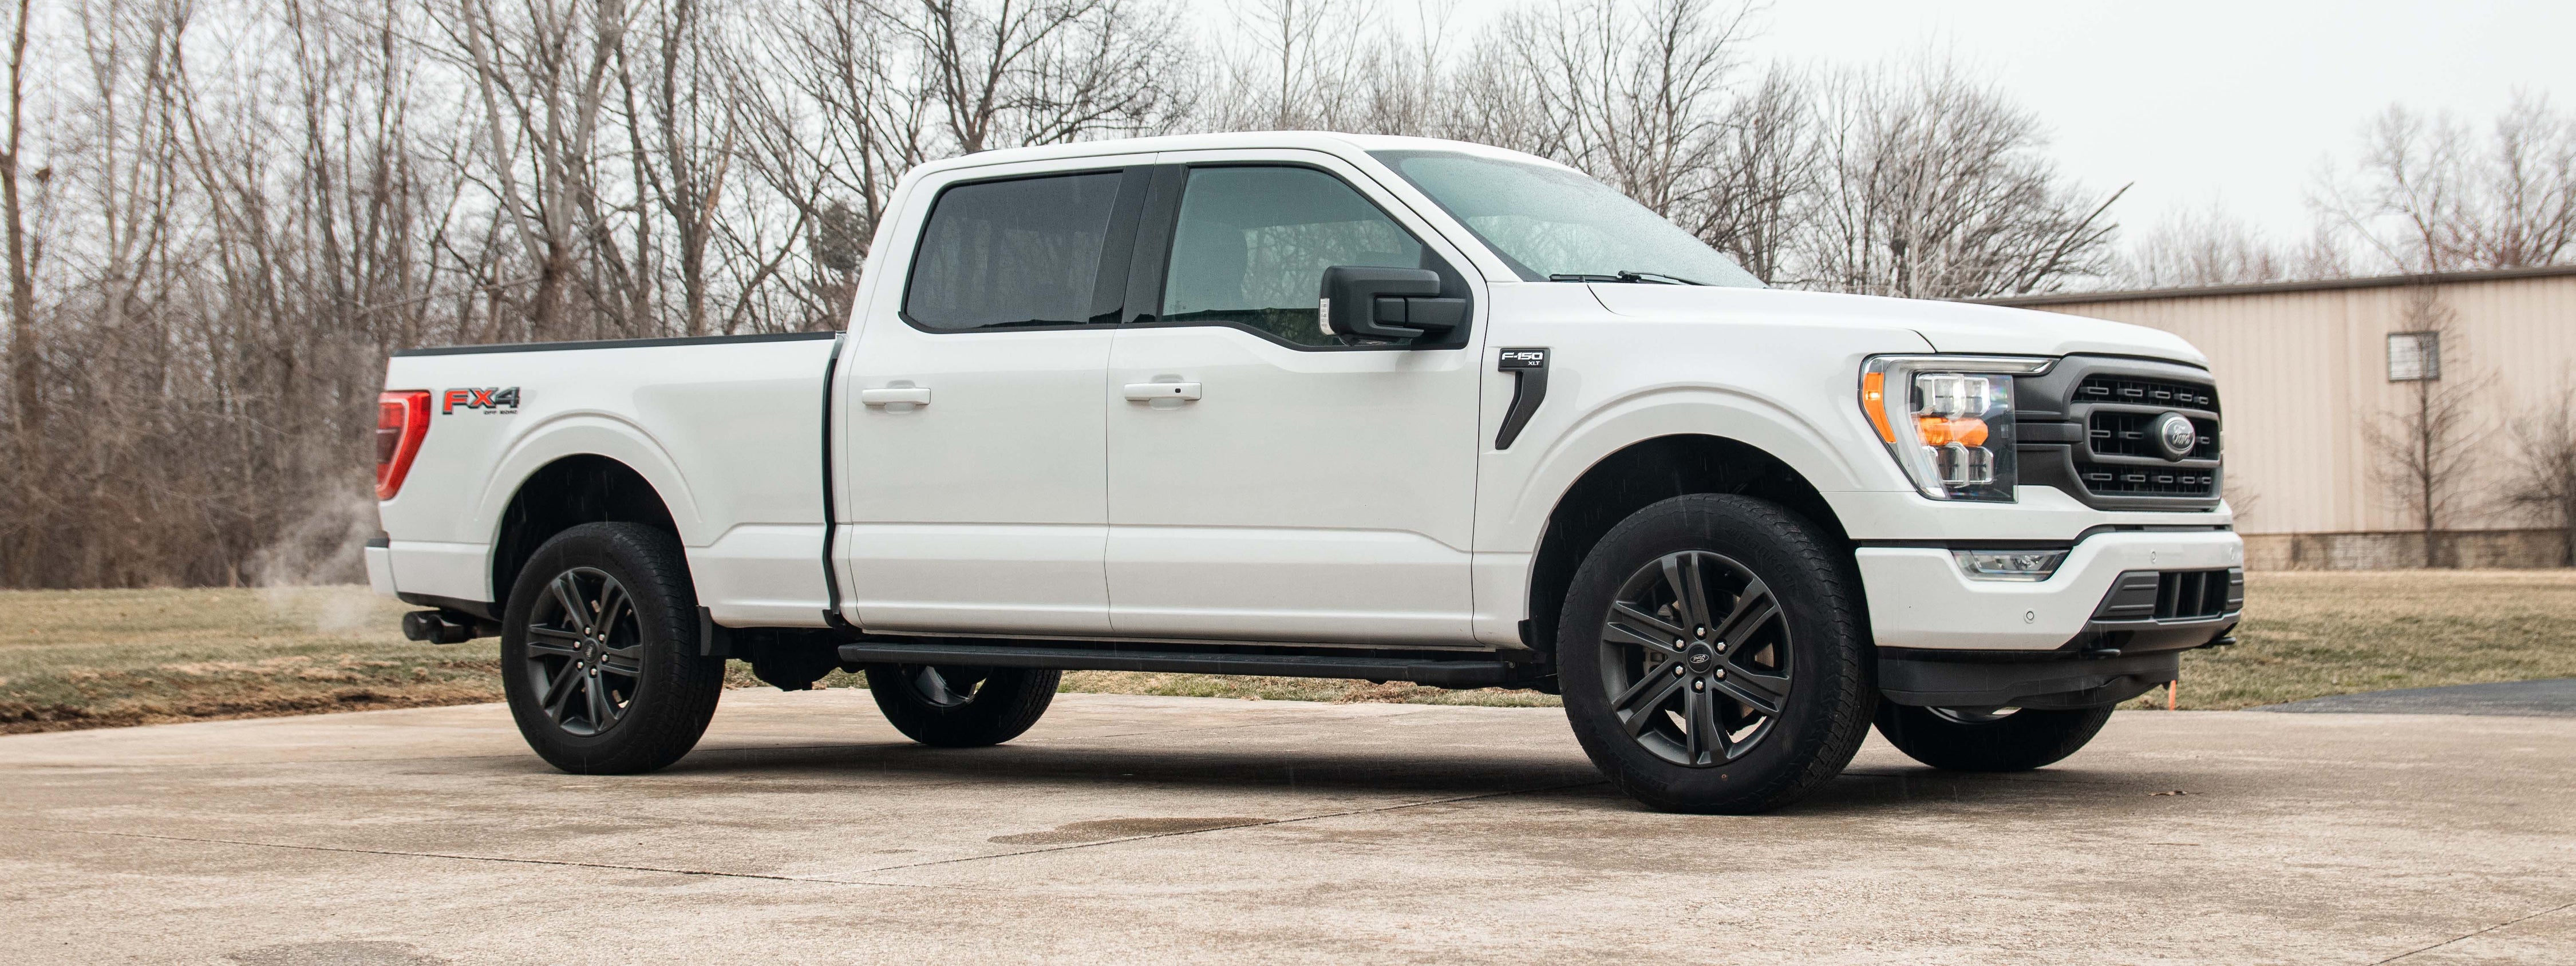 F150 Performance Parts & Exhaust System Upgrades Shop Ford F150